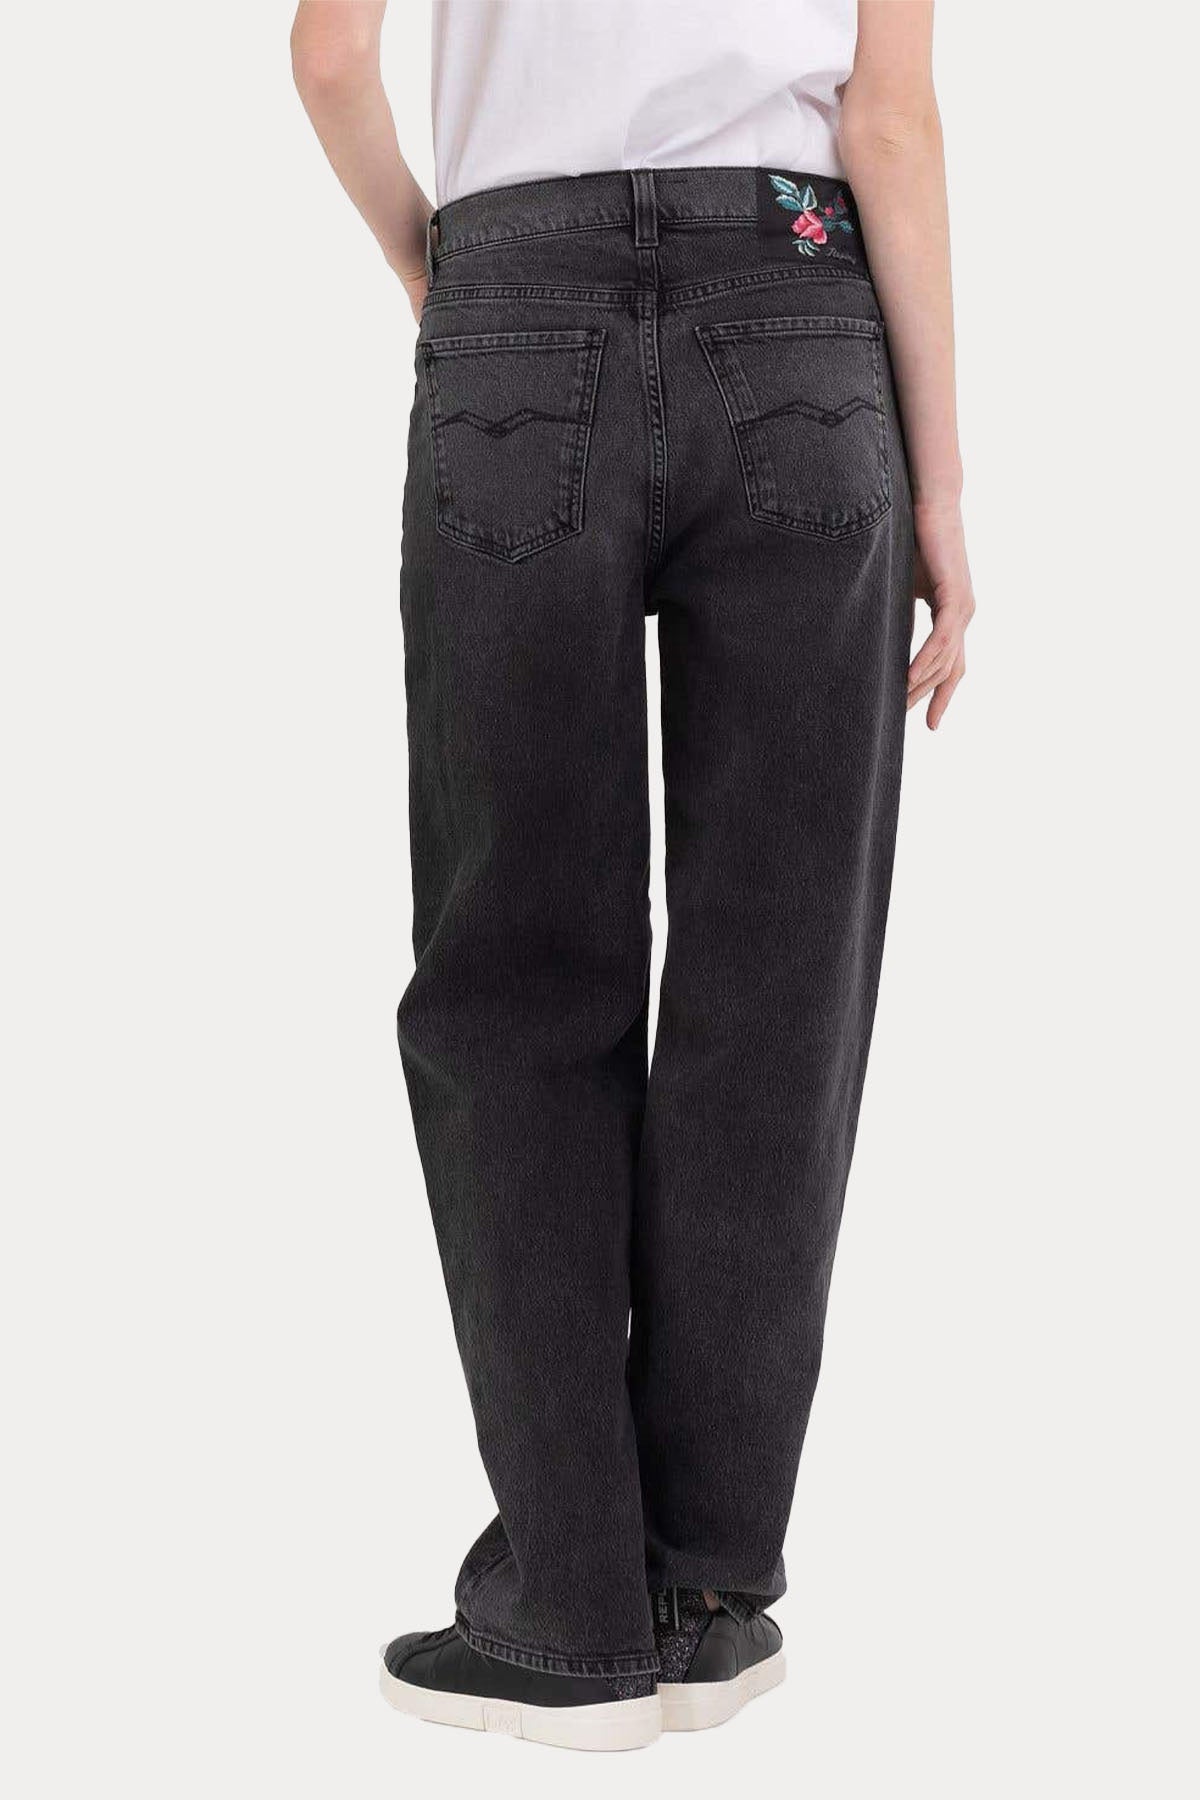 Replay Zelmaa Loose Wide Leg Fit Jeans